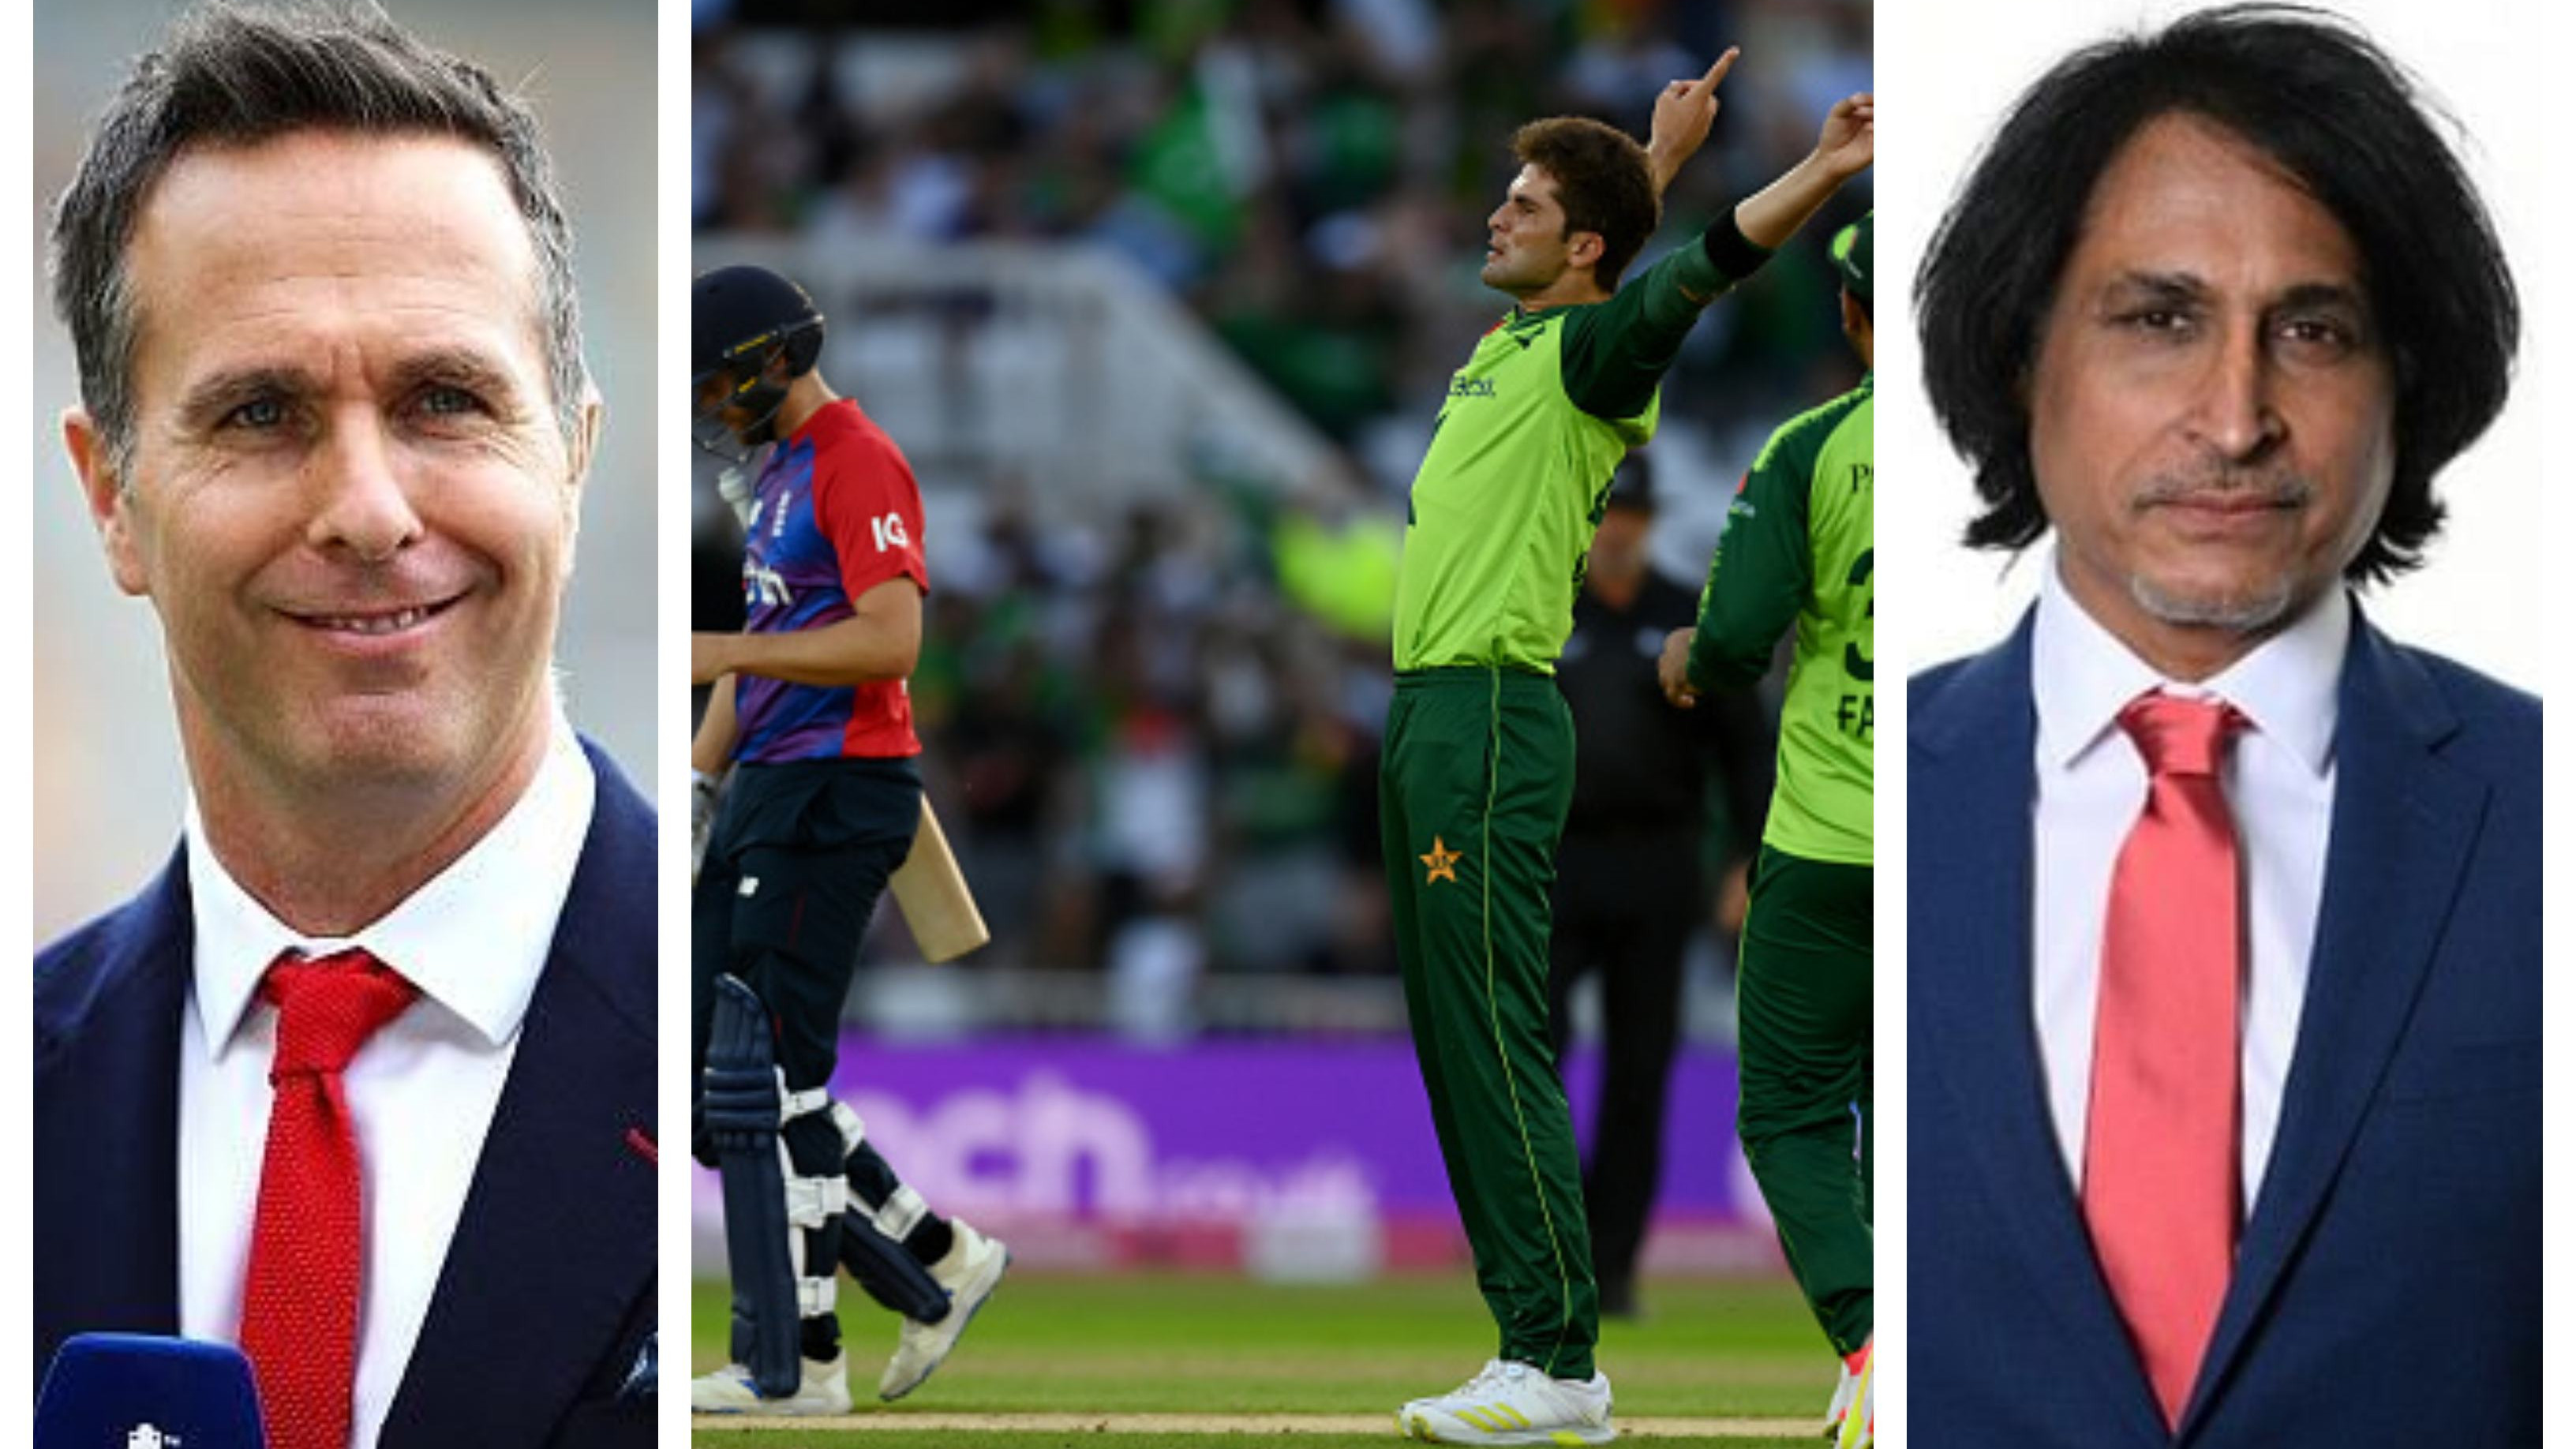 ENG v PAK 2021: ‘From local village team to world beaters’, Cricket fraternity lauds Pakistan’s emphatic win in 1st T20I